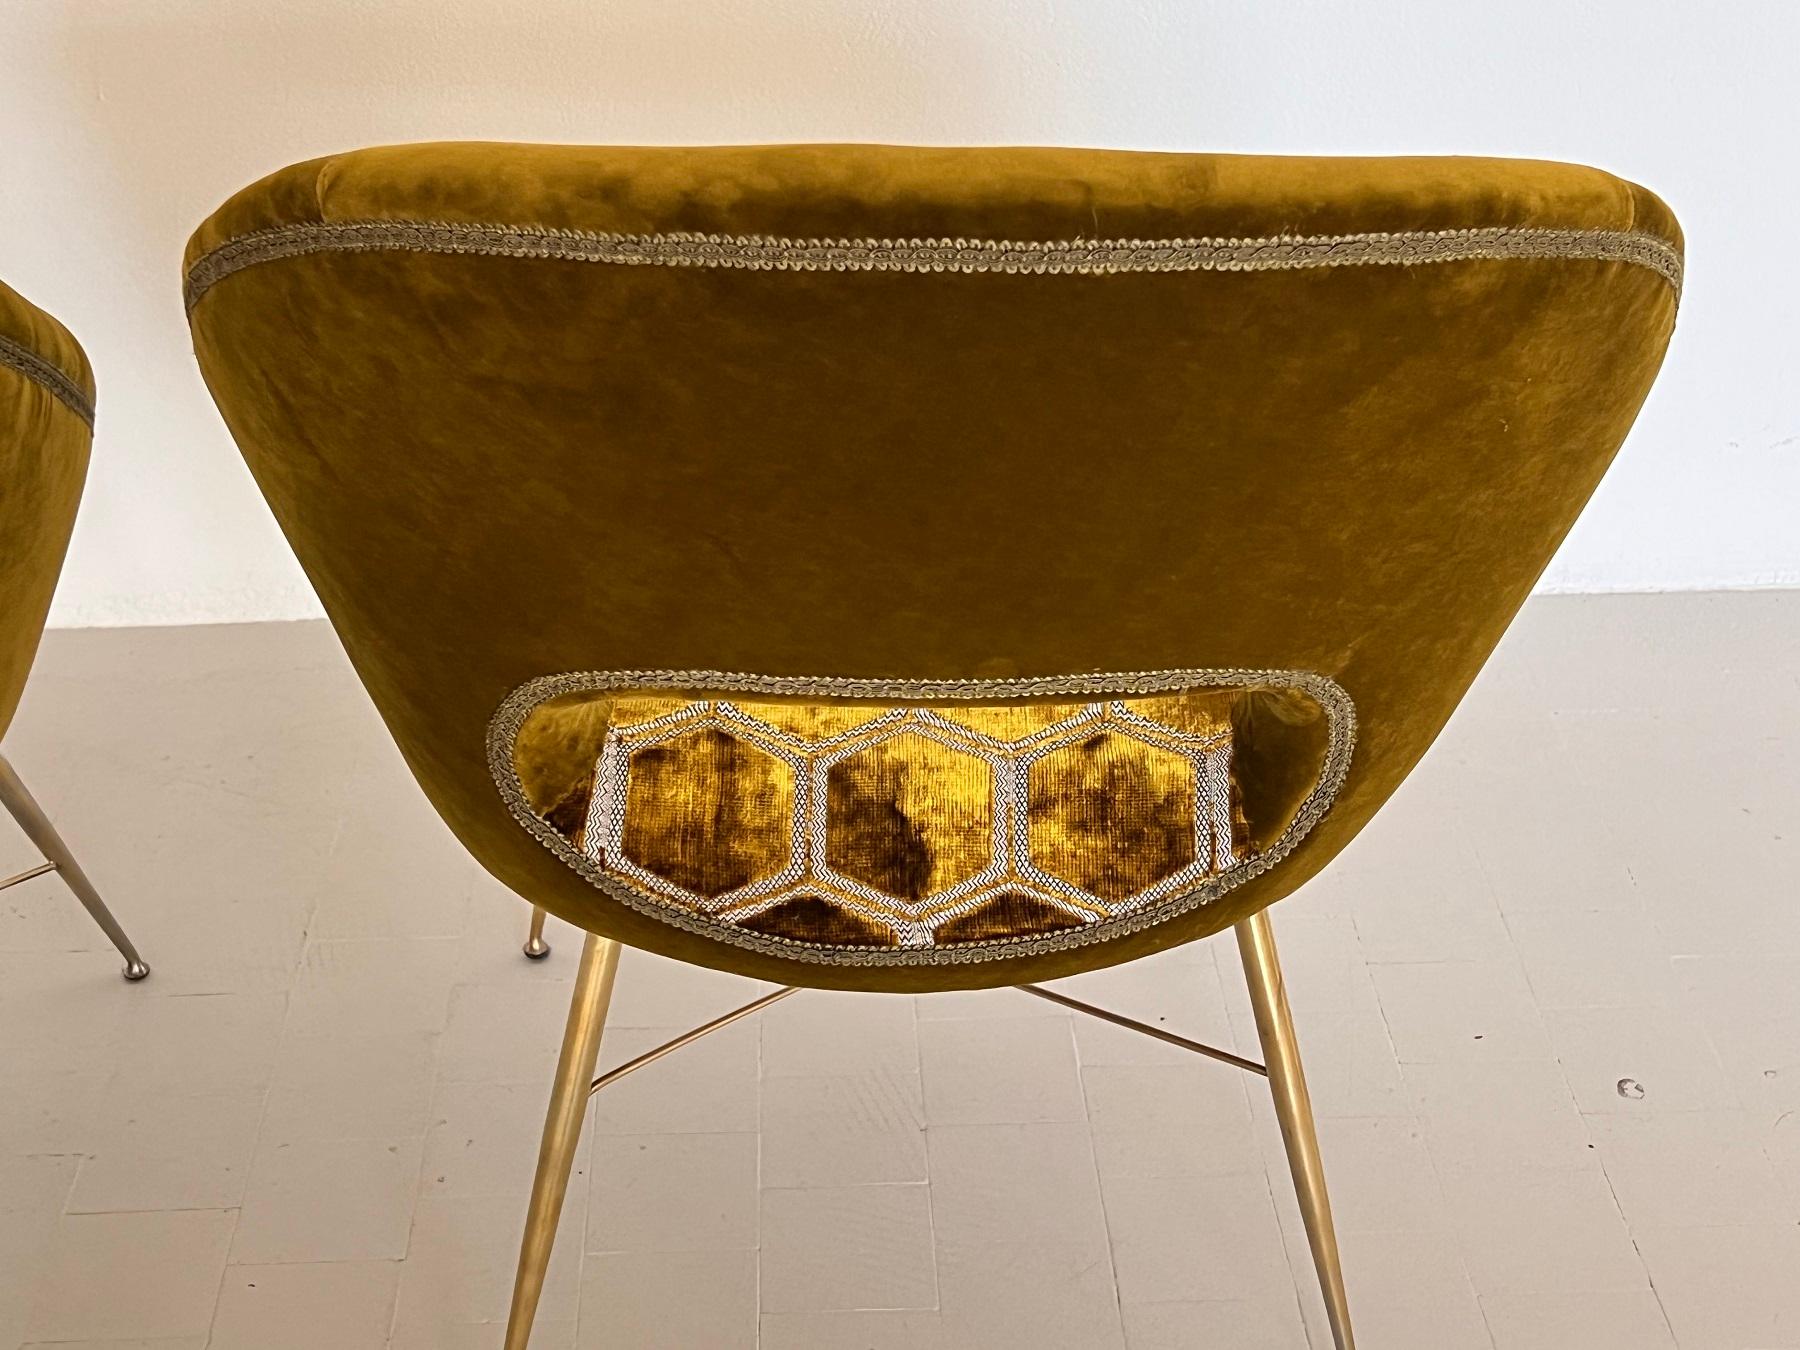 Silvio Cavatorta Pair of Chairs with Brass Legs Re-upholstered in Velvet, 1950s For Sale 3